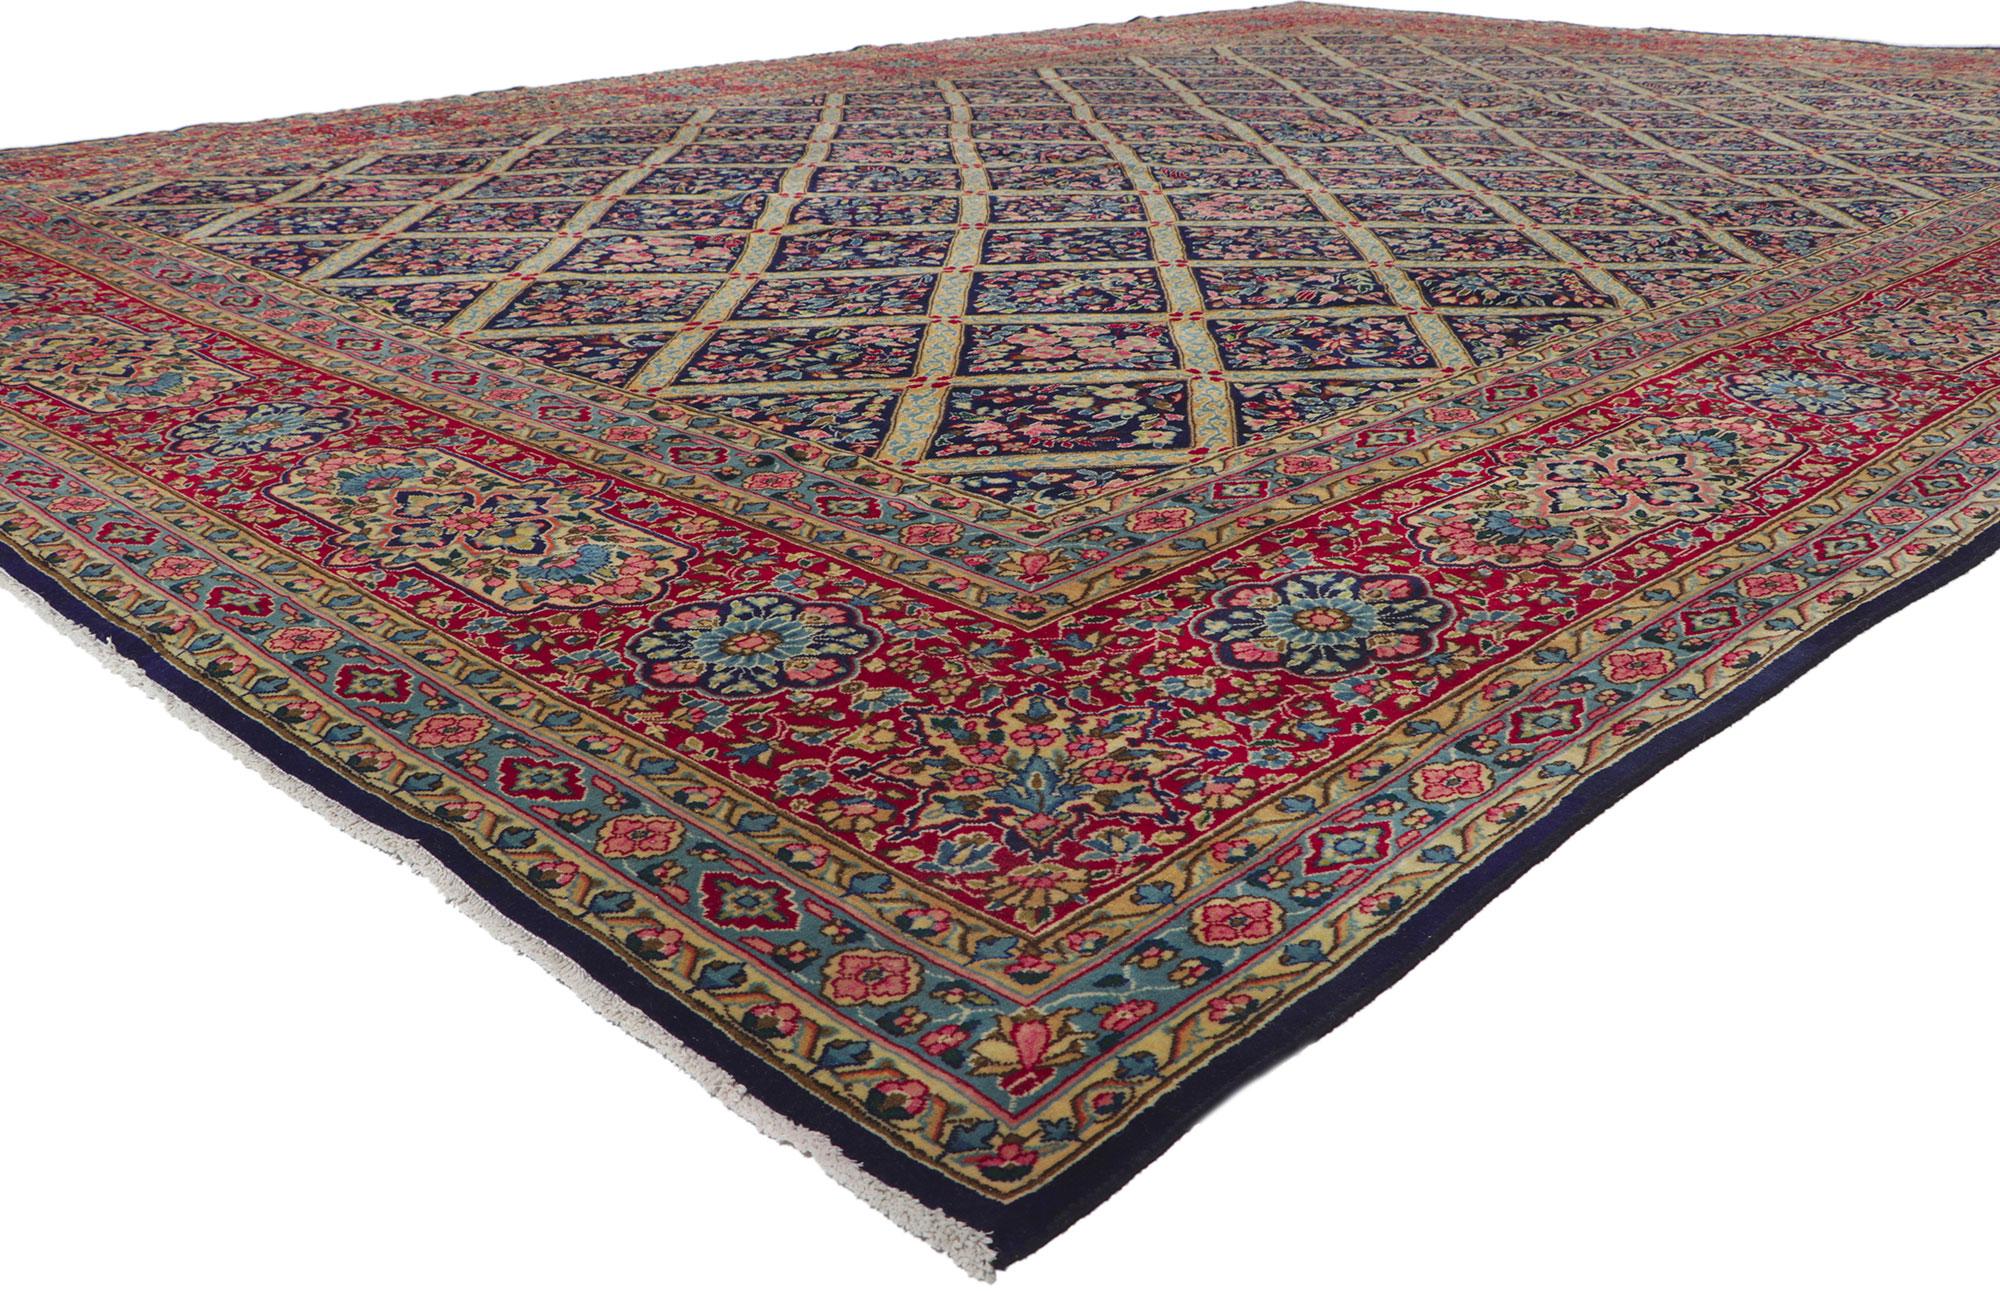 ?61200 Antique Persian Kerman Rug, 13'00 x 19'00. Emanating a timeless floral design, incredible detail and texture, this hand knotted wool antique Persian Kerman rug is a captivating vision of woven beauty. The ornate details and sophisticated